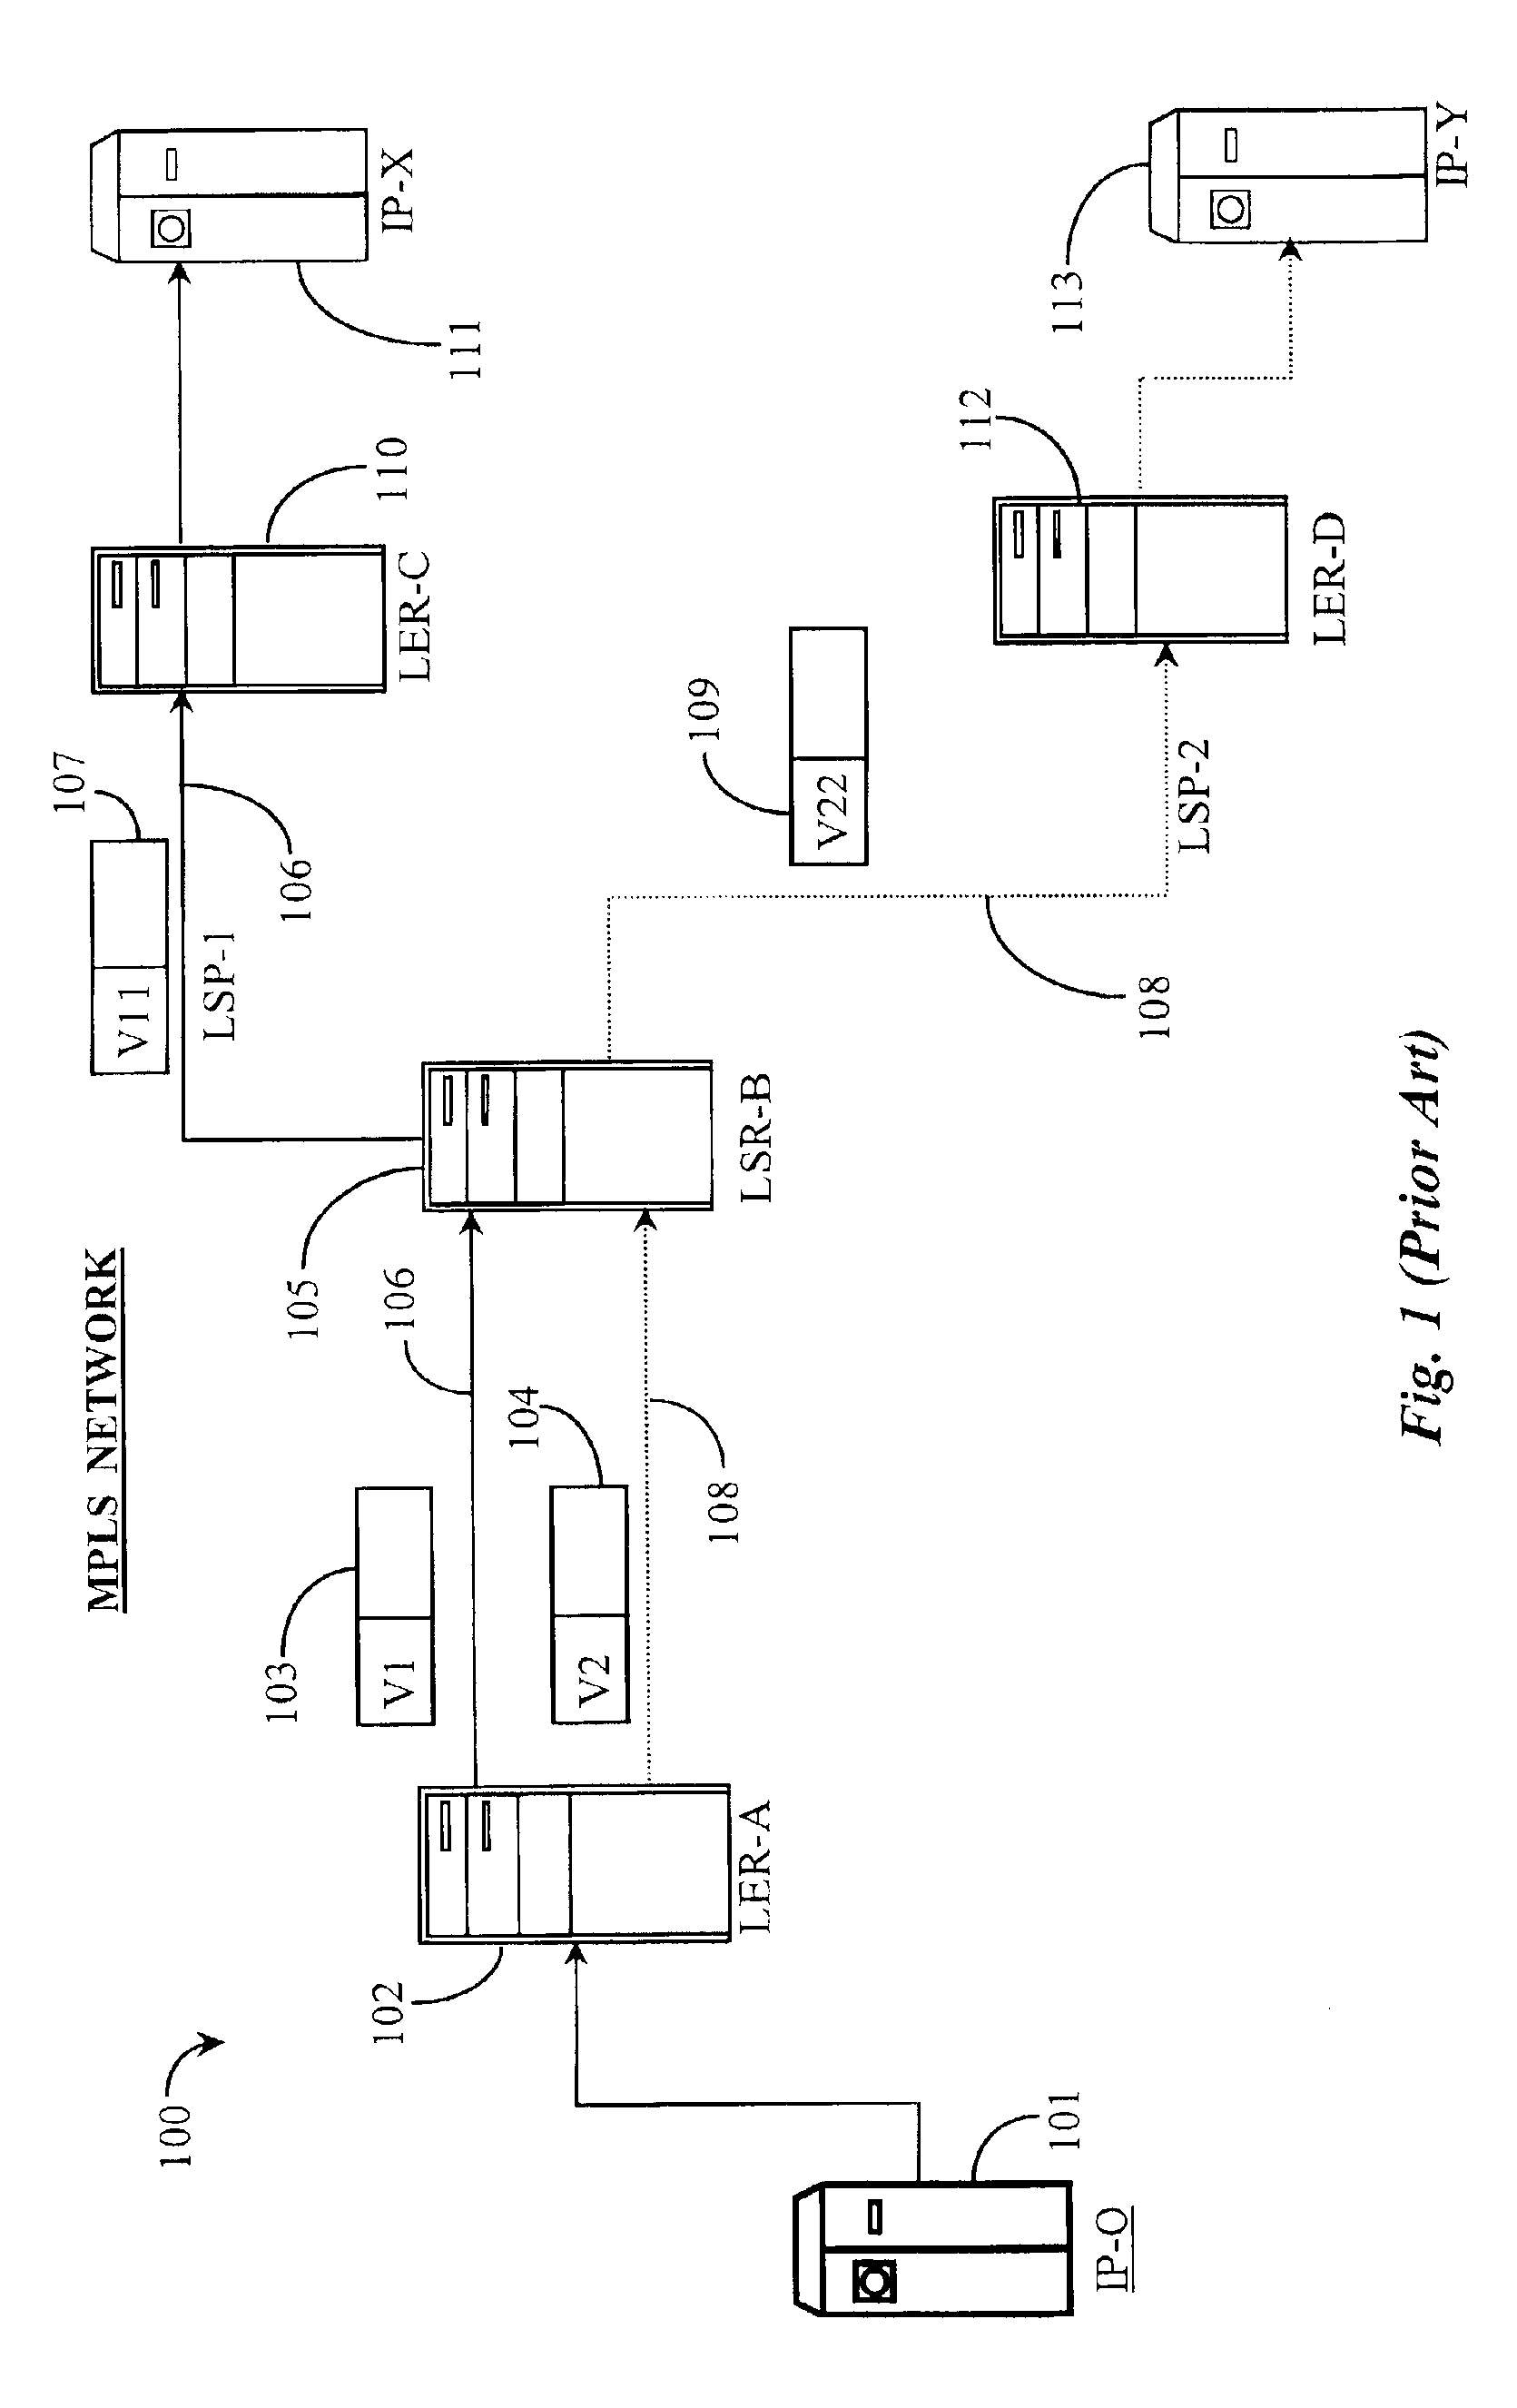 Fault-protection mechanism for protecting multi-protocol-label switching (MPLS) capability within a distributed processor router operating in an MPLS network